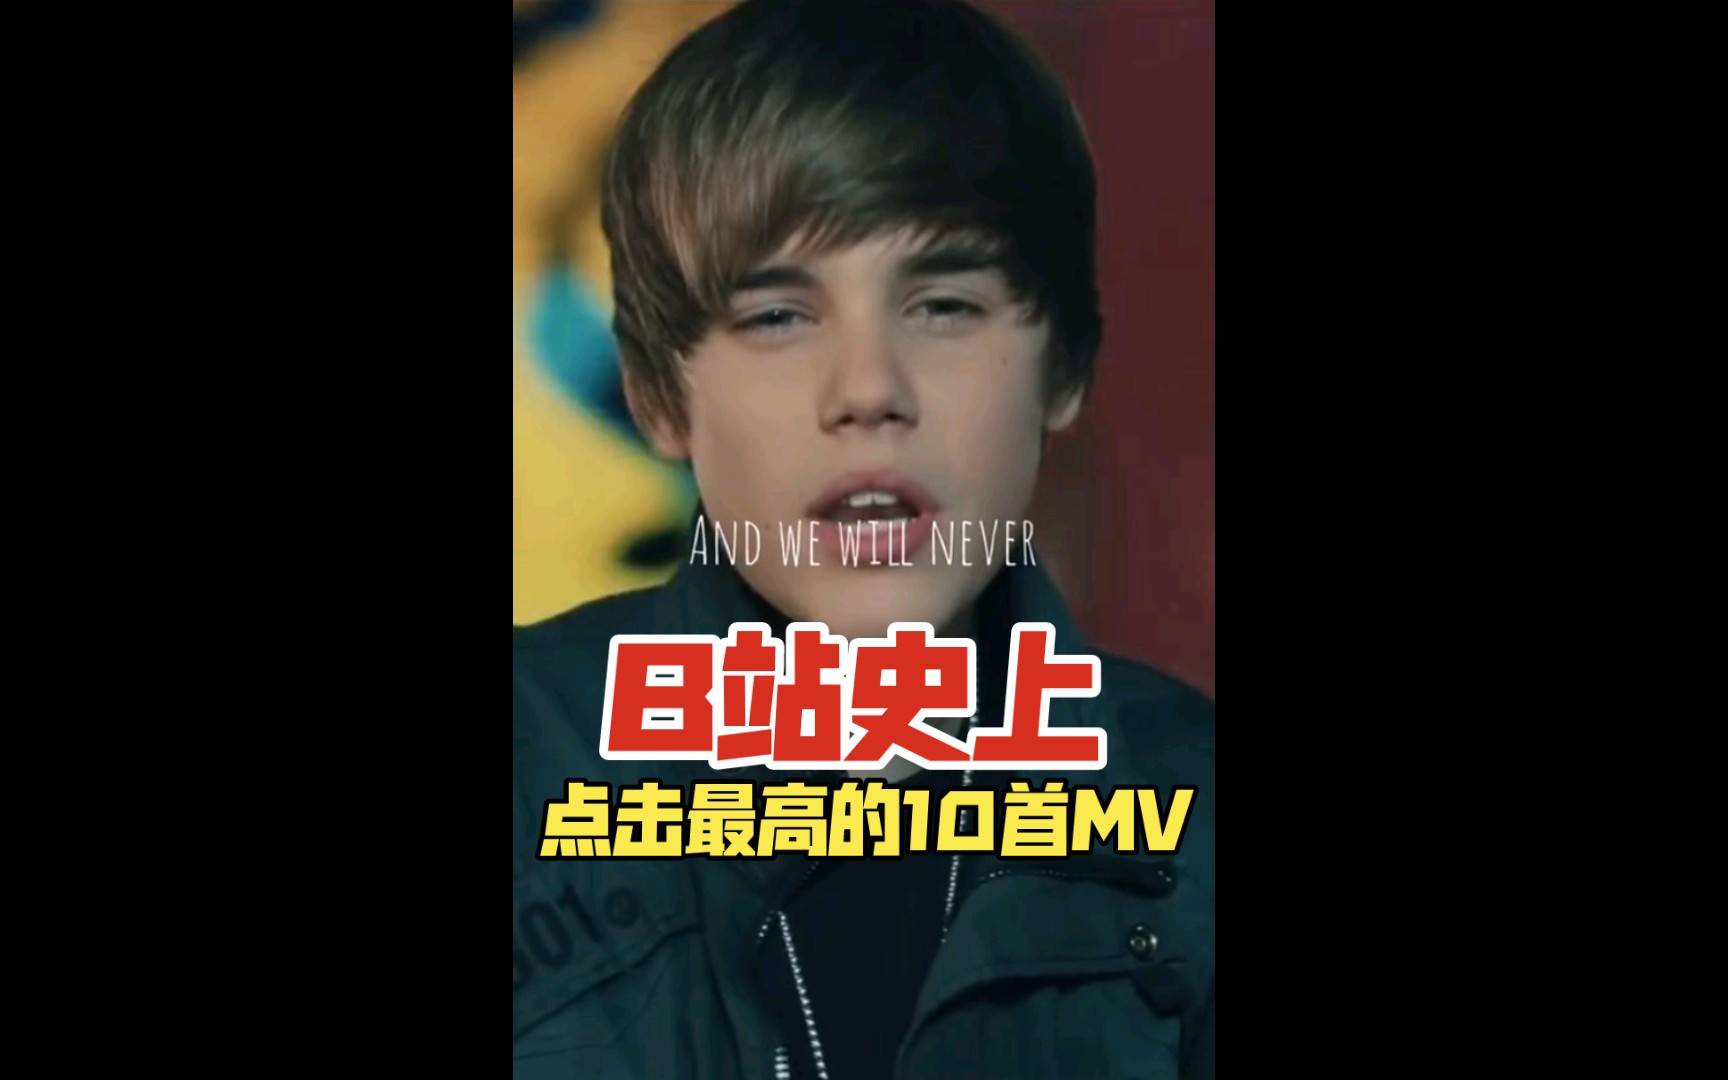 Baby-Justin Bieber Numbered Musical Notation Preview